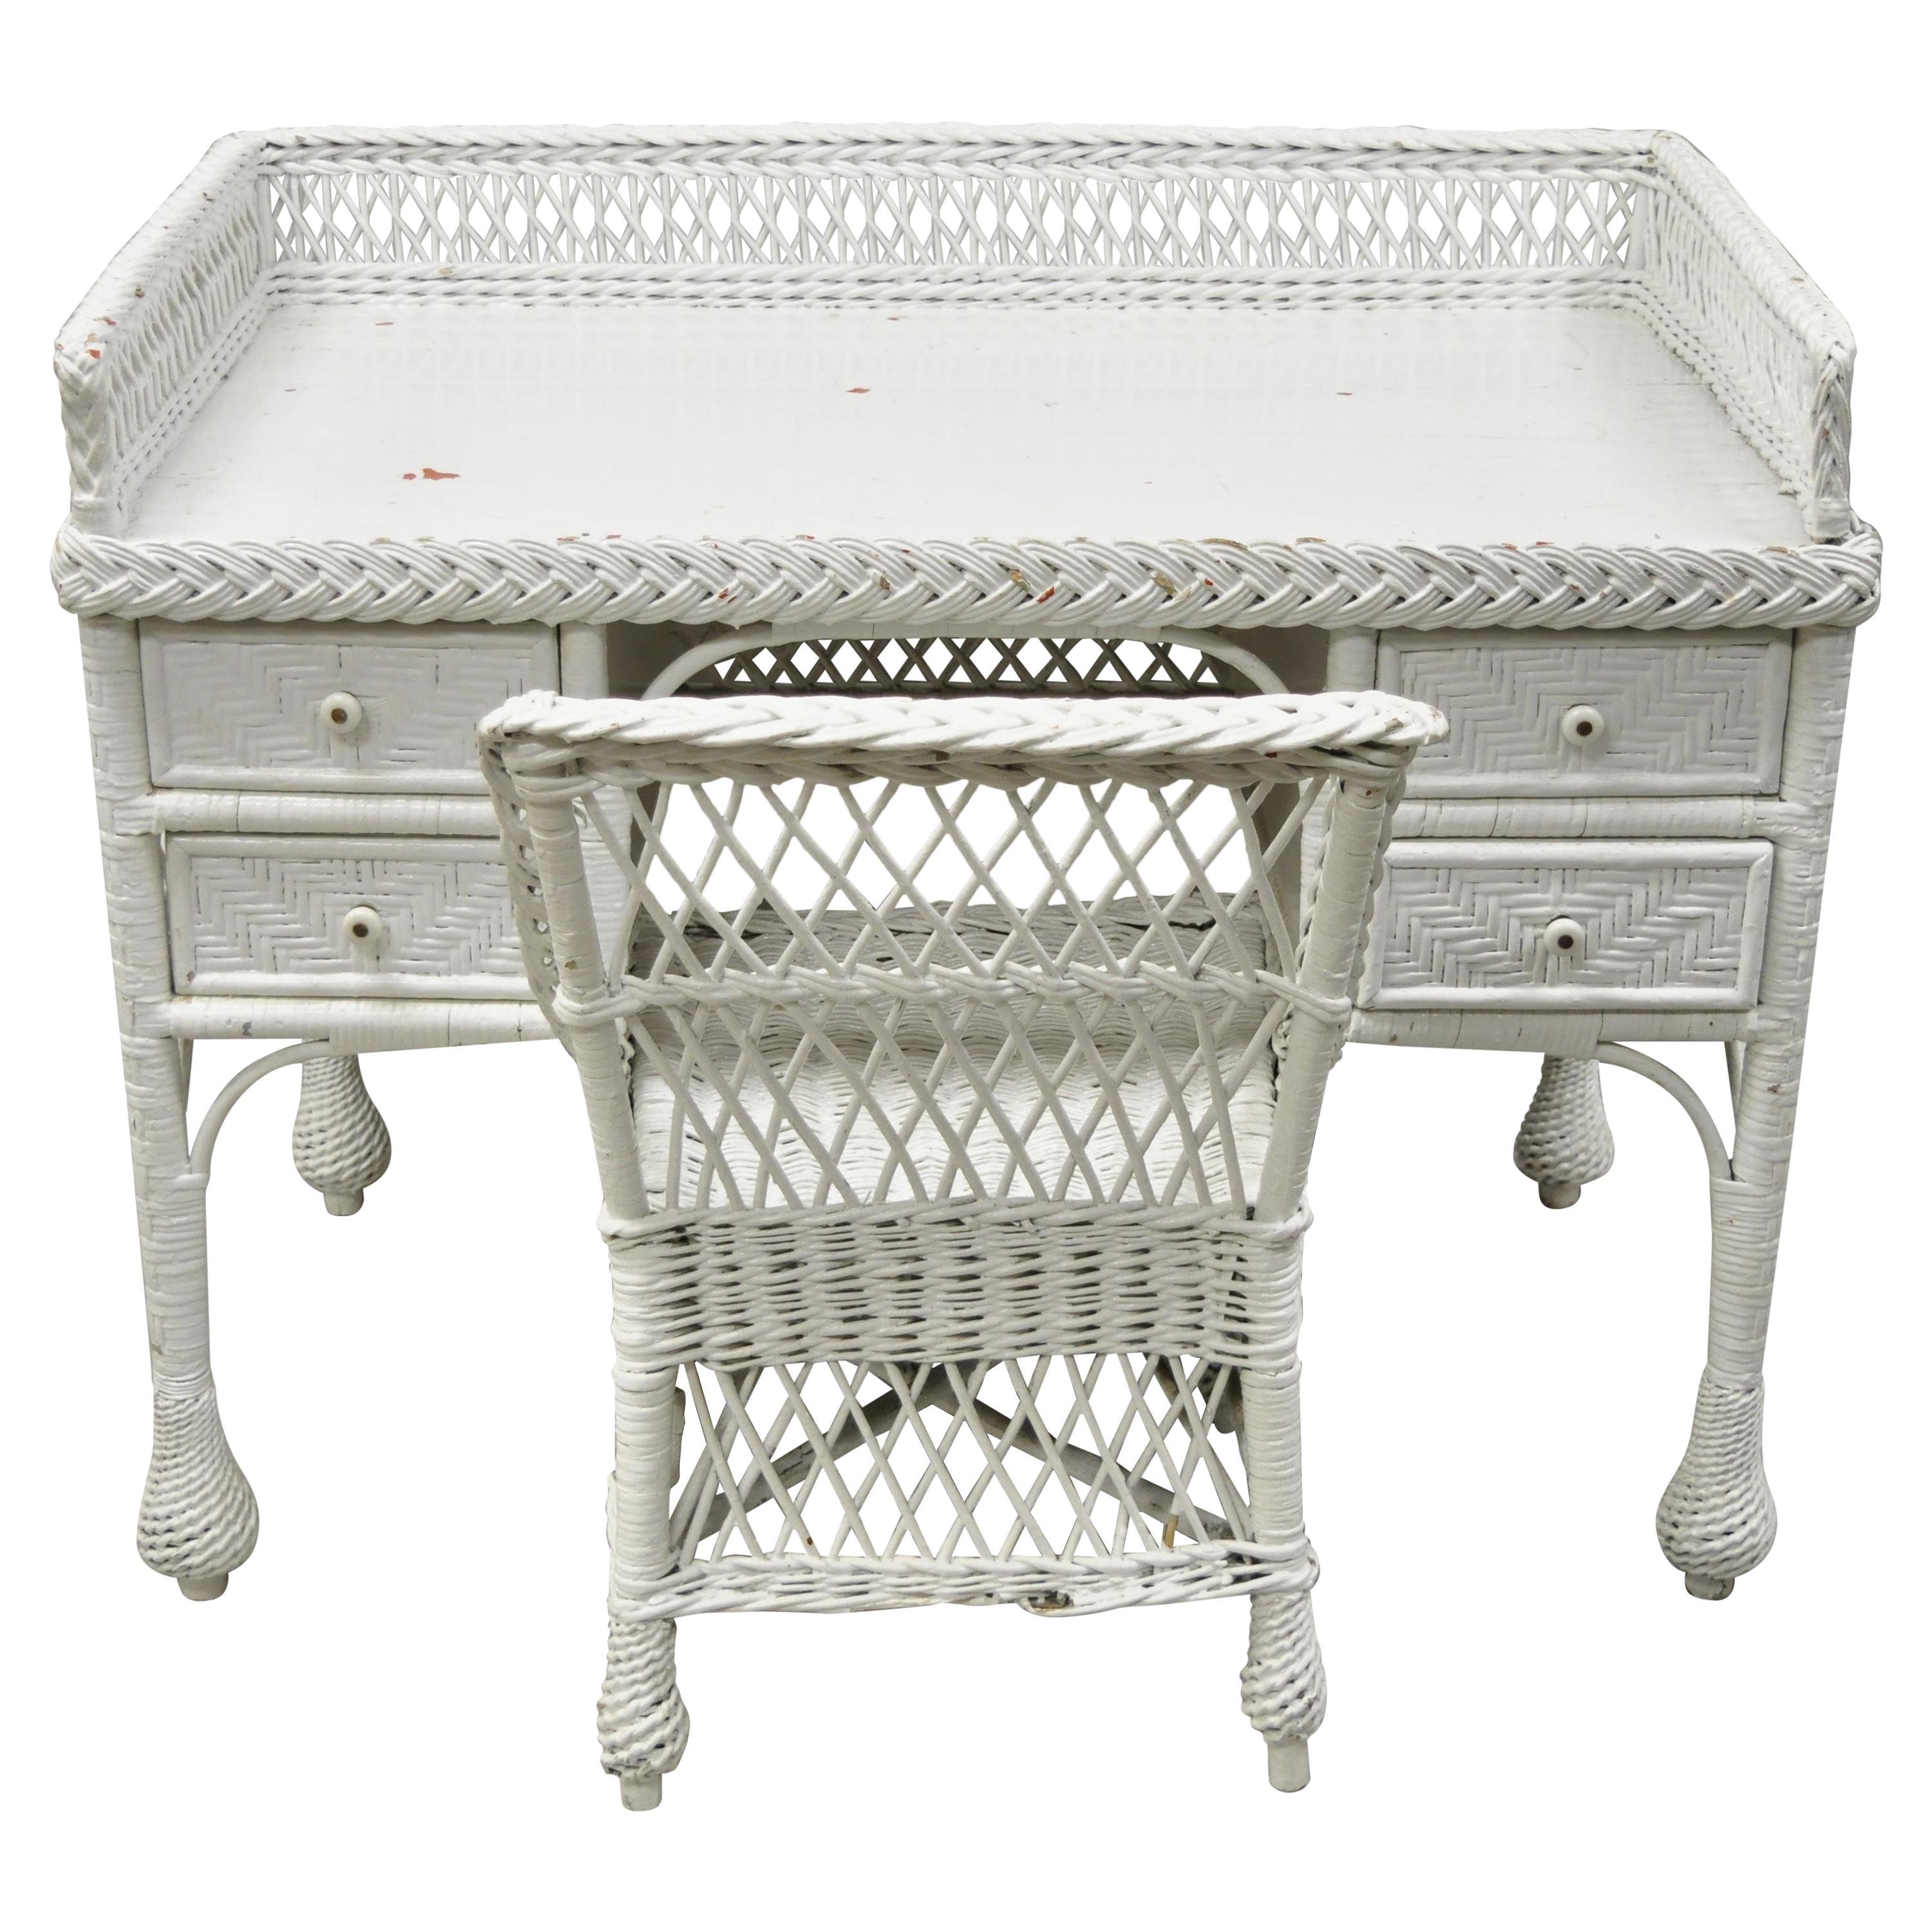 Antique Victorian Style White Wicker Vanity Desk with Drawers and Chair Set